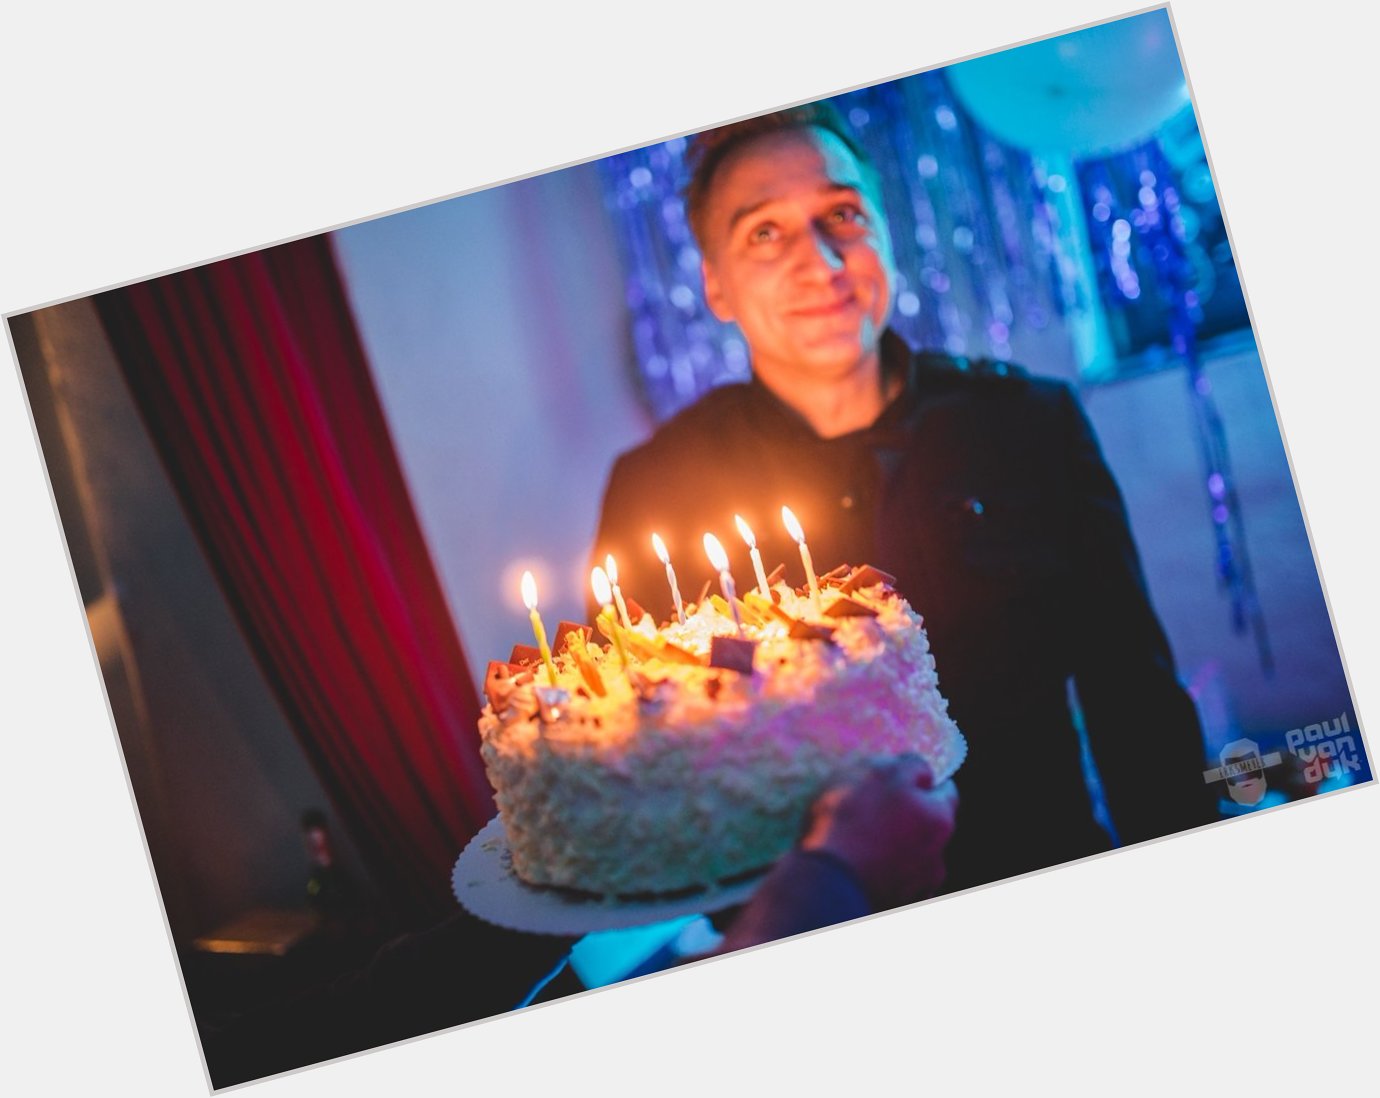 Congratulations Paul van Dyk who has many years of life and good work, Happy birthday   